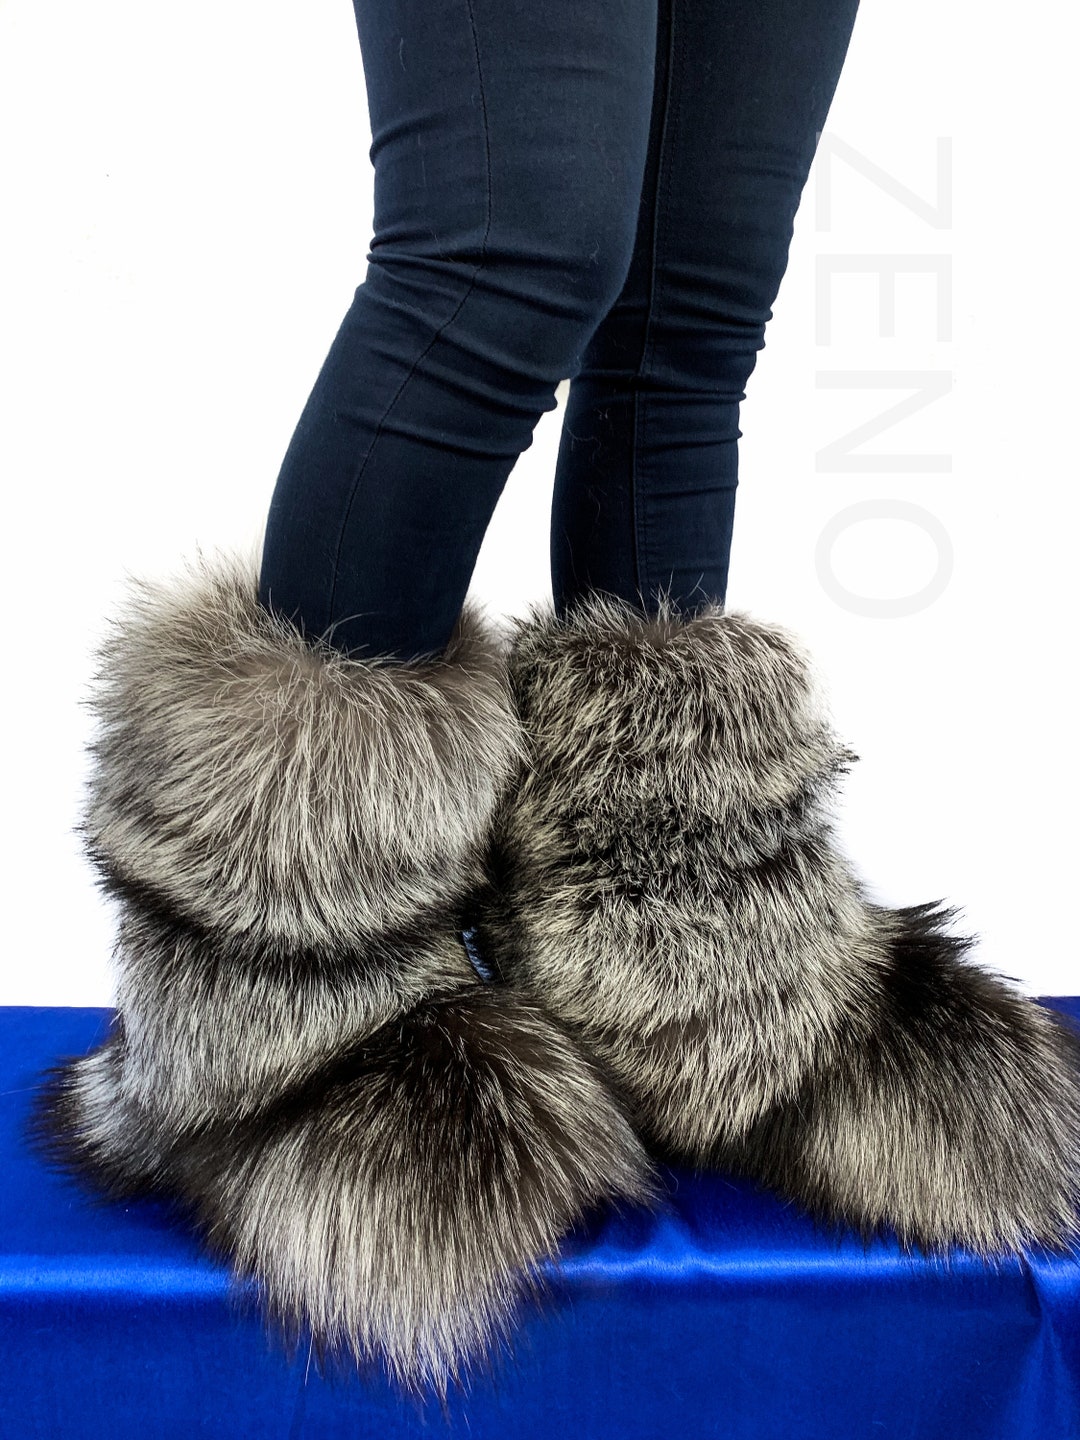 Double-sided Silver Fox Fur Boots for Outdoor Arctic Boots - Etsy